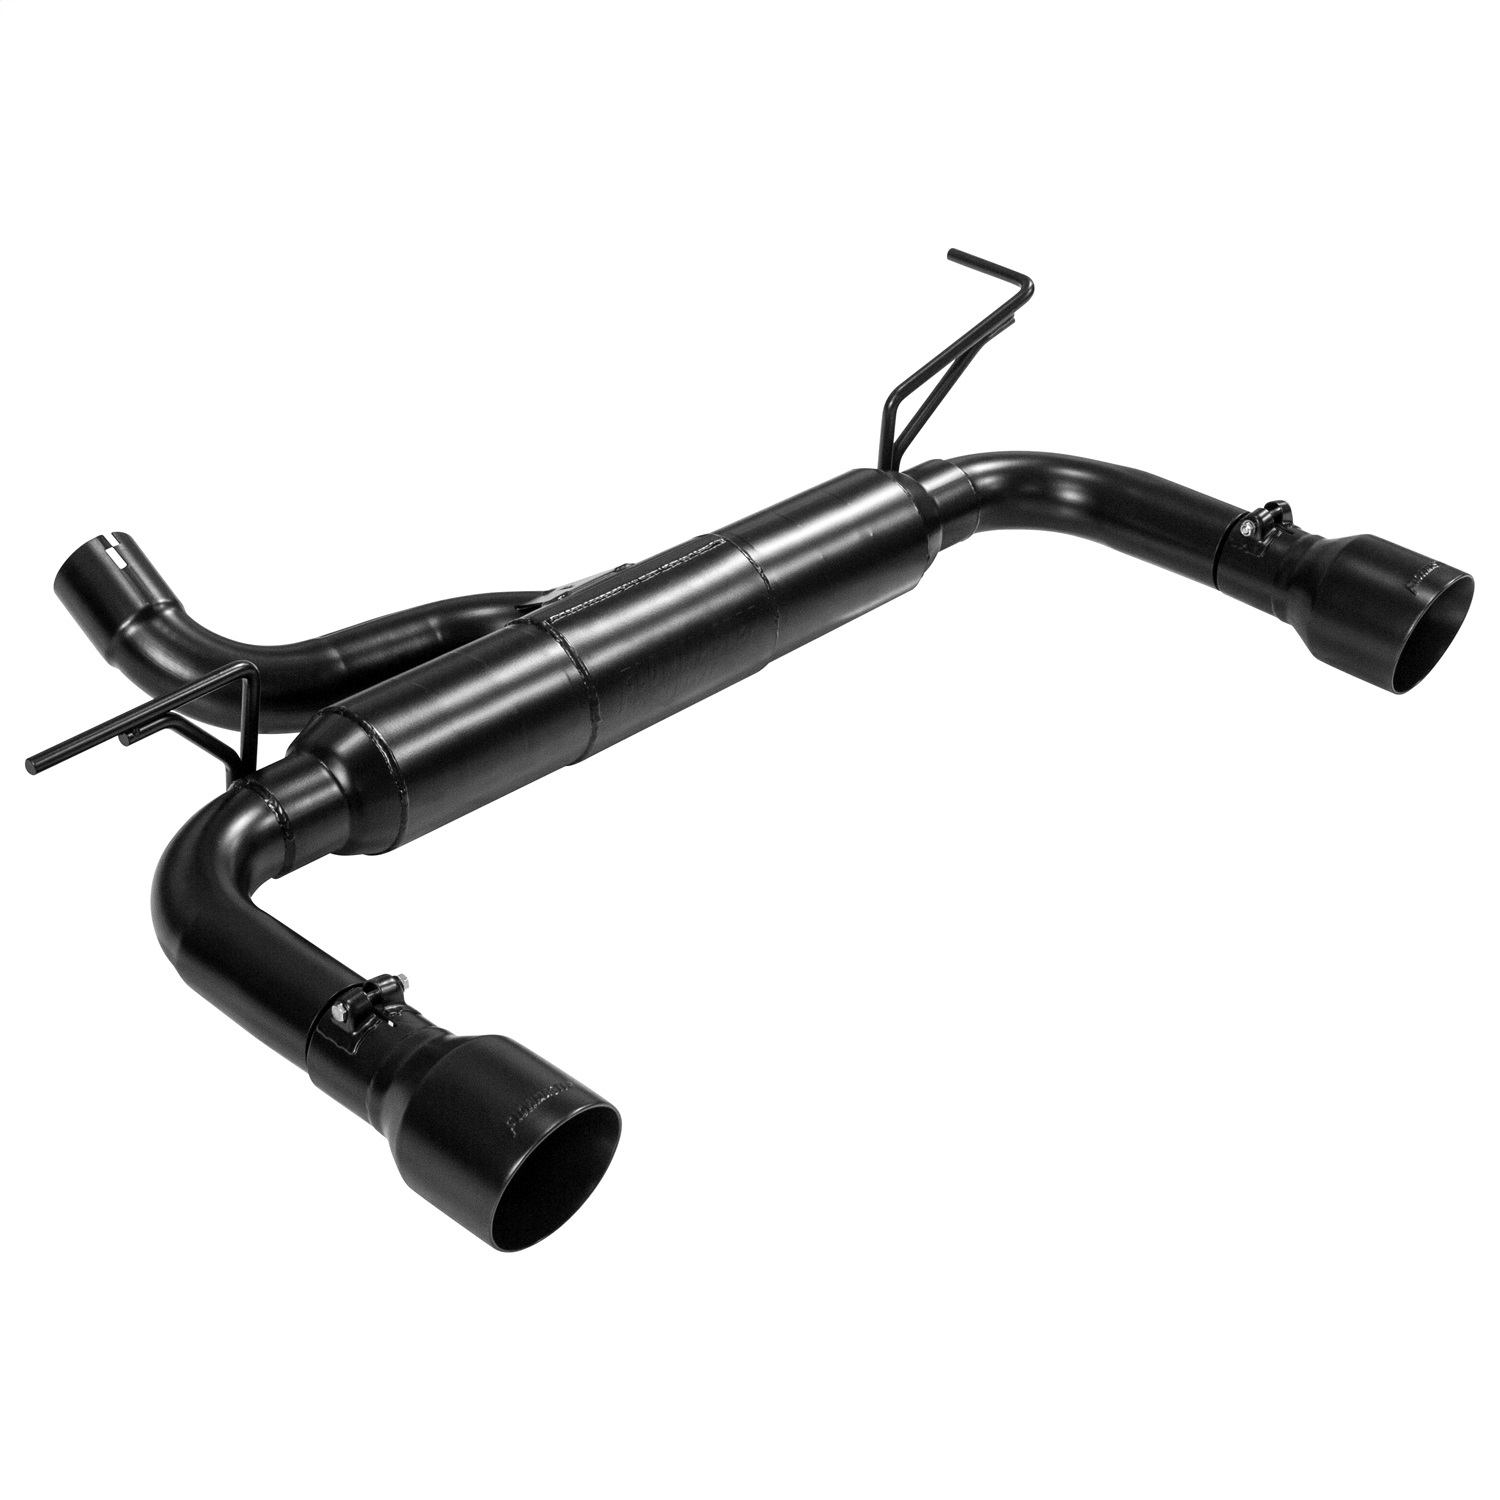 Flowmaster 817752 Outlaw Series Axle Back Exhaust System Fits Wrangler